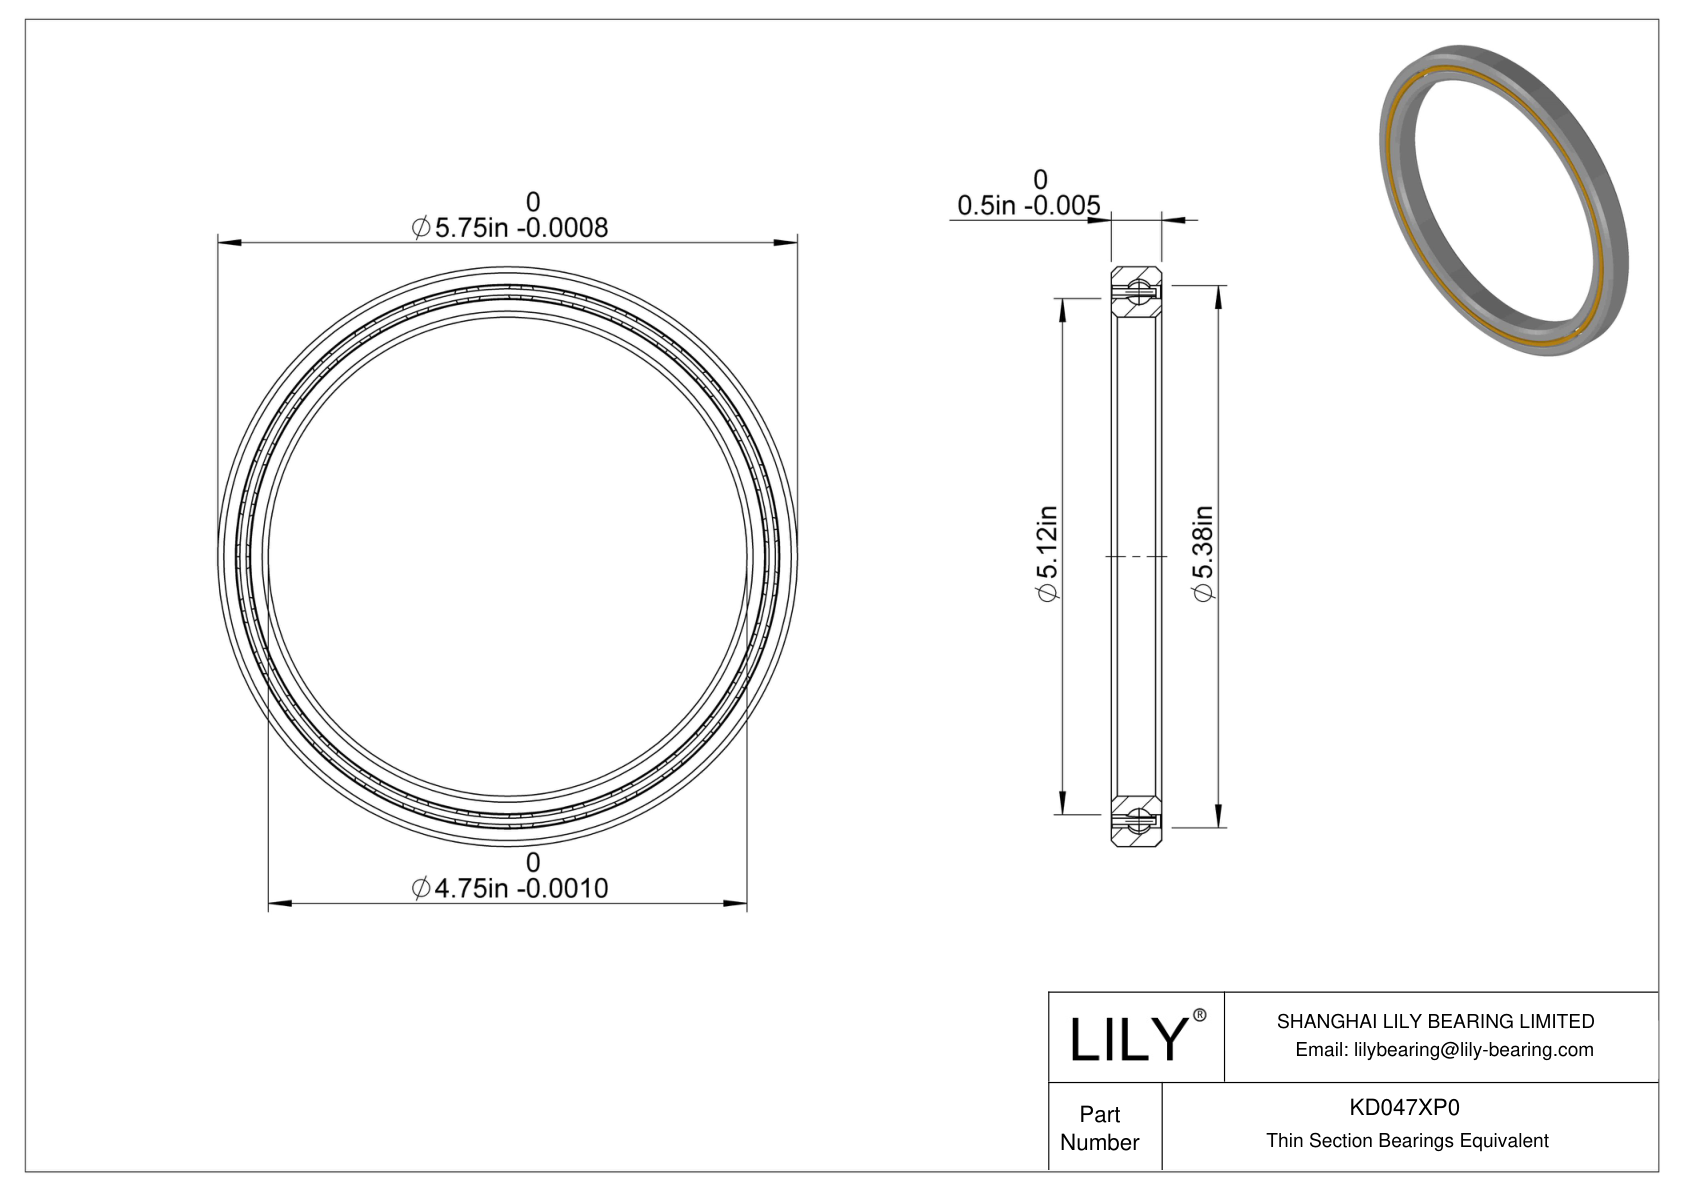 KD047XP0 Constant Section (CS) Bearings cad drawing